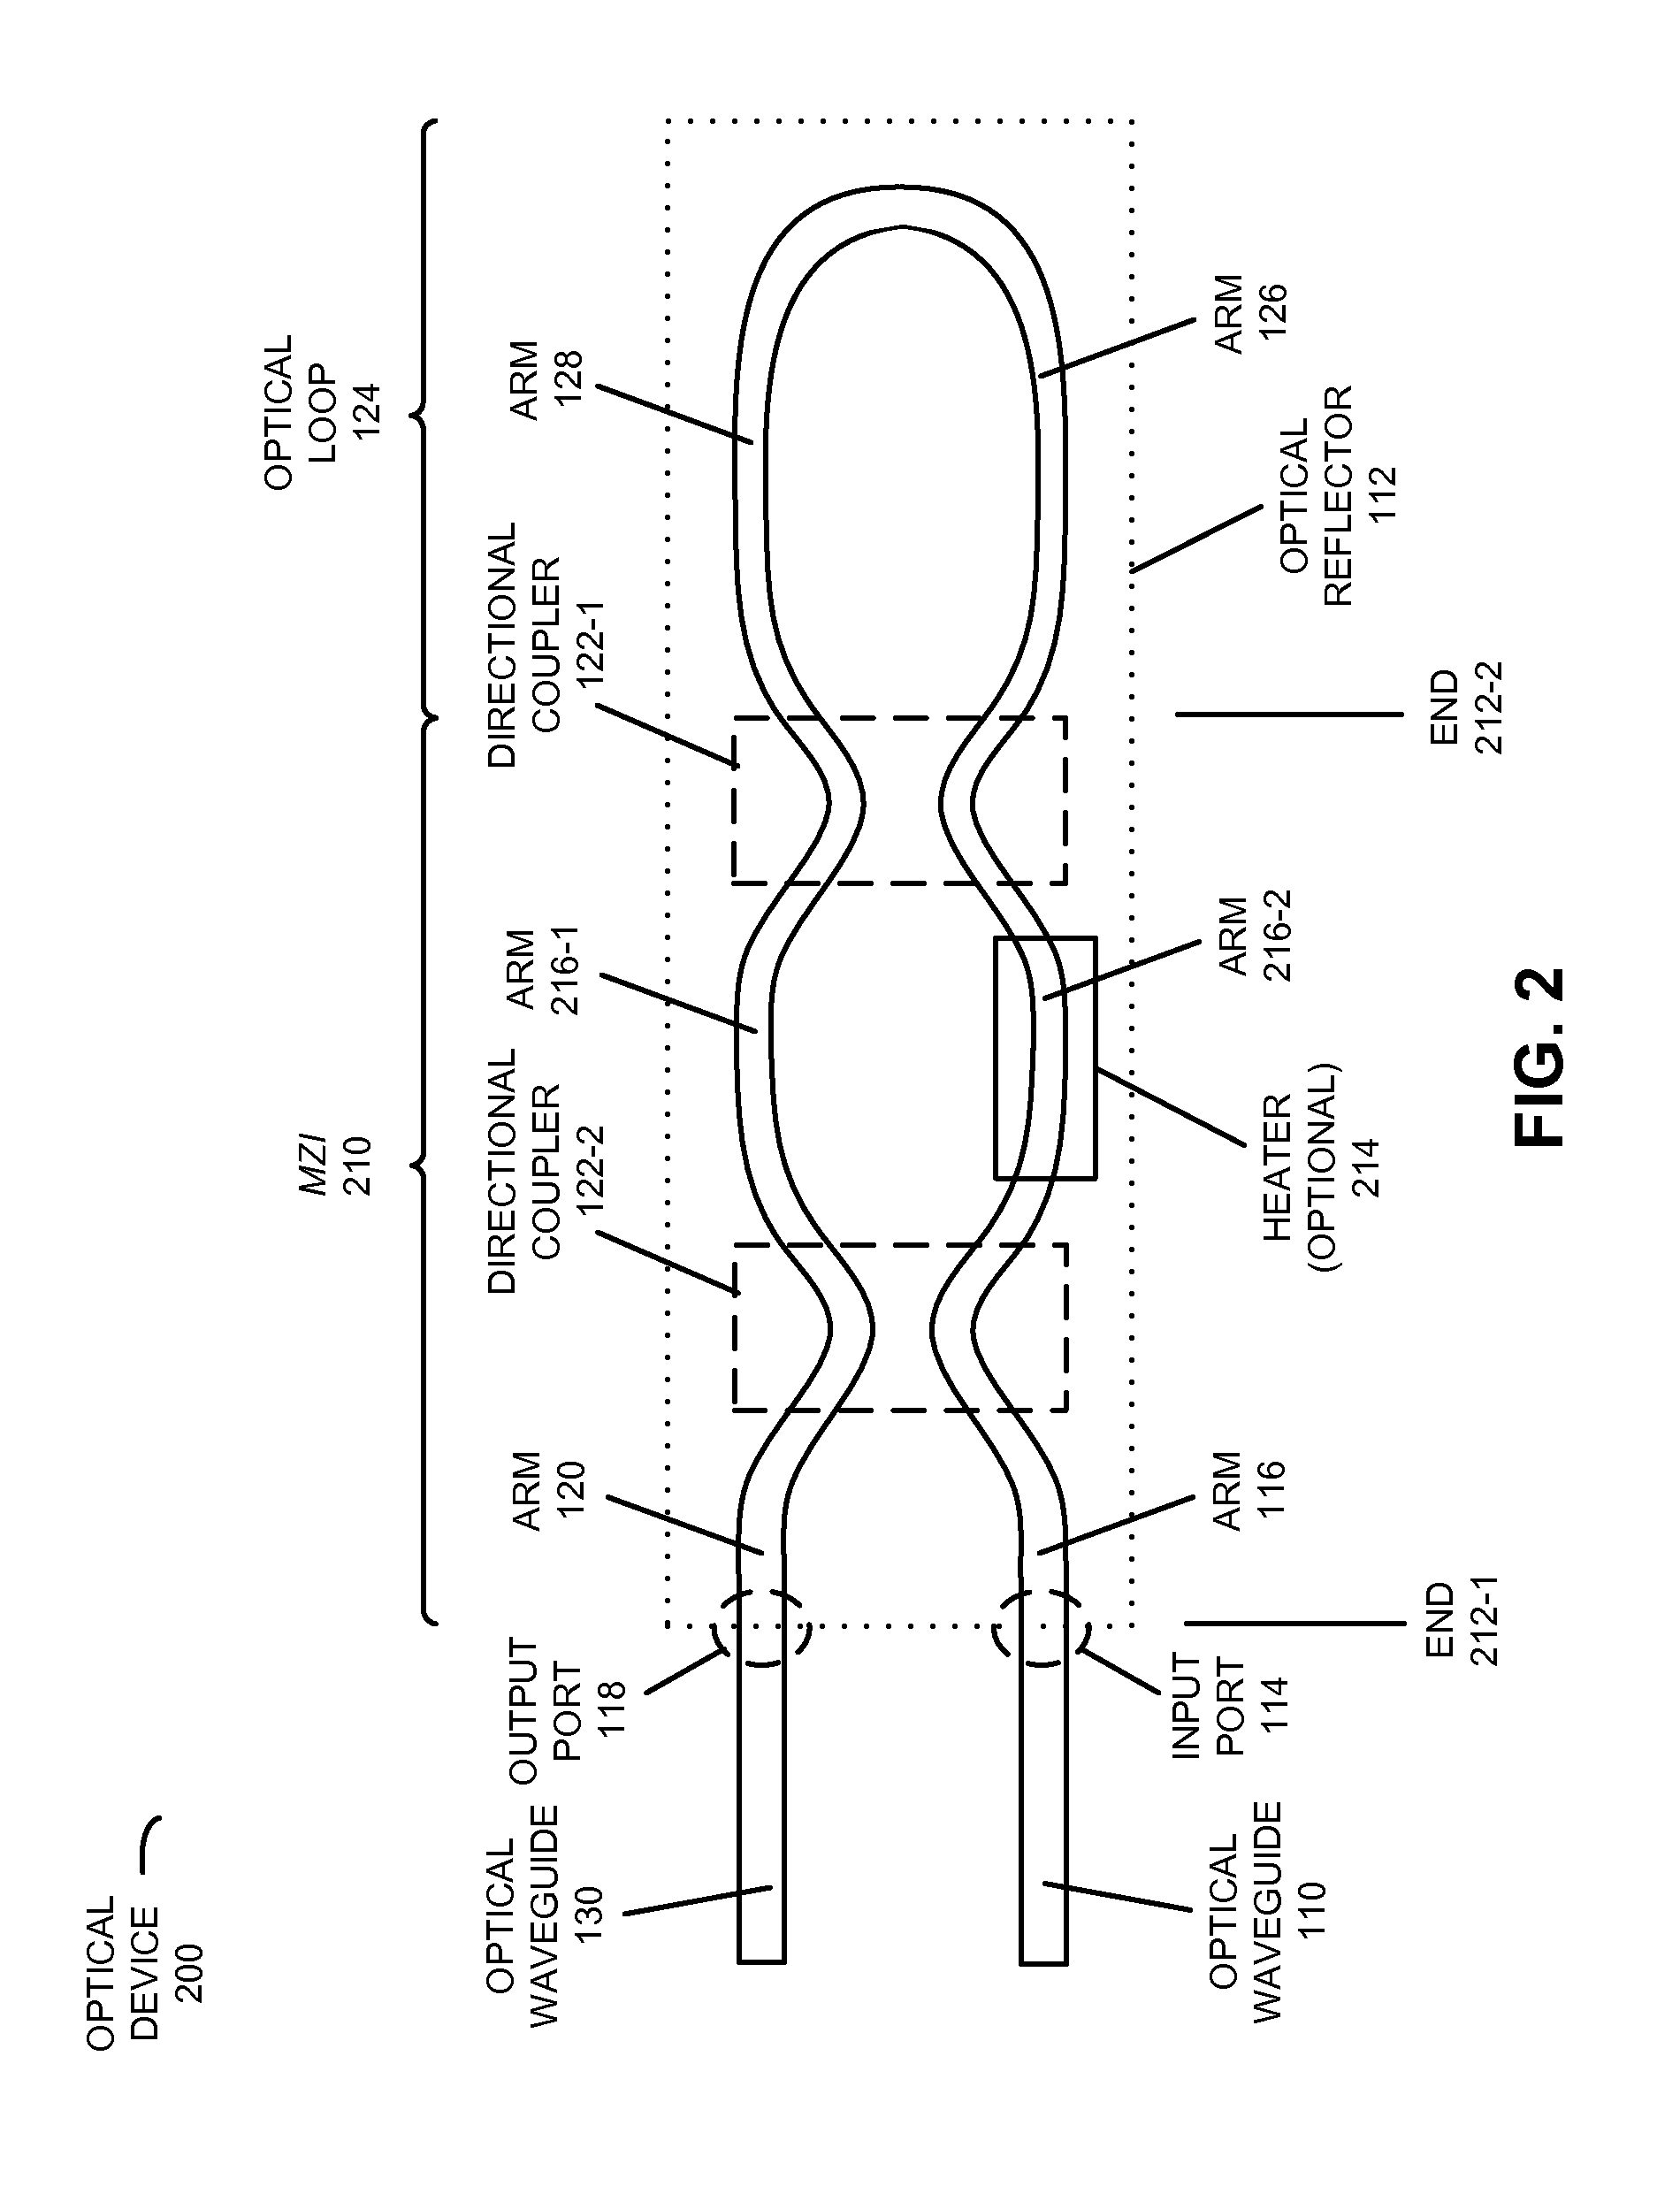 Reflector based on a directionally coupled optical loop